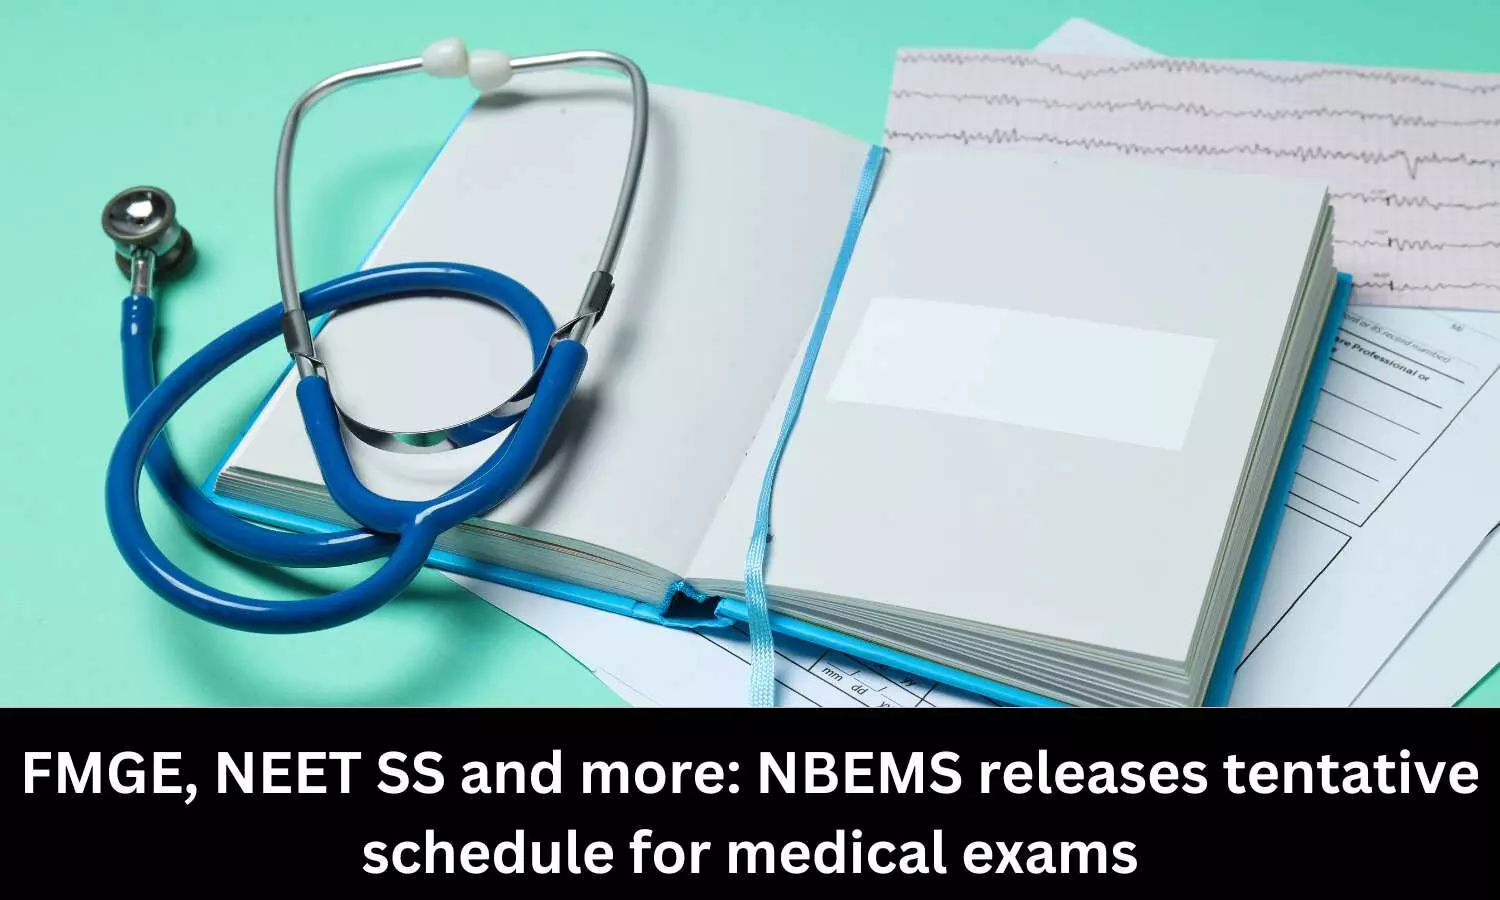 NBE releases tentative schedule for FAT, FMGE, DNB,DrNB,NEET SS exams